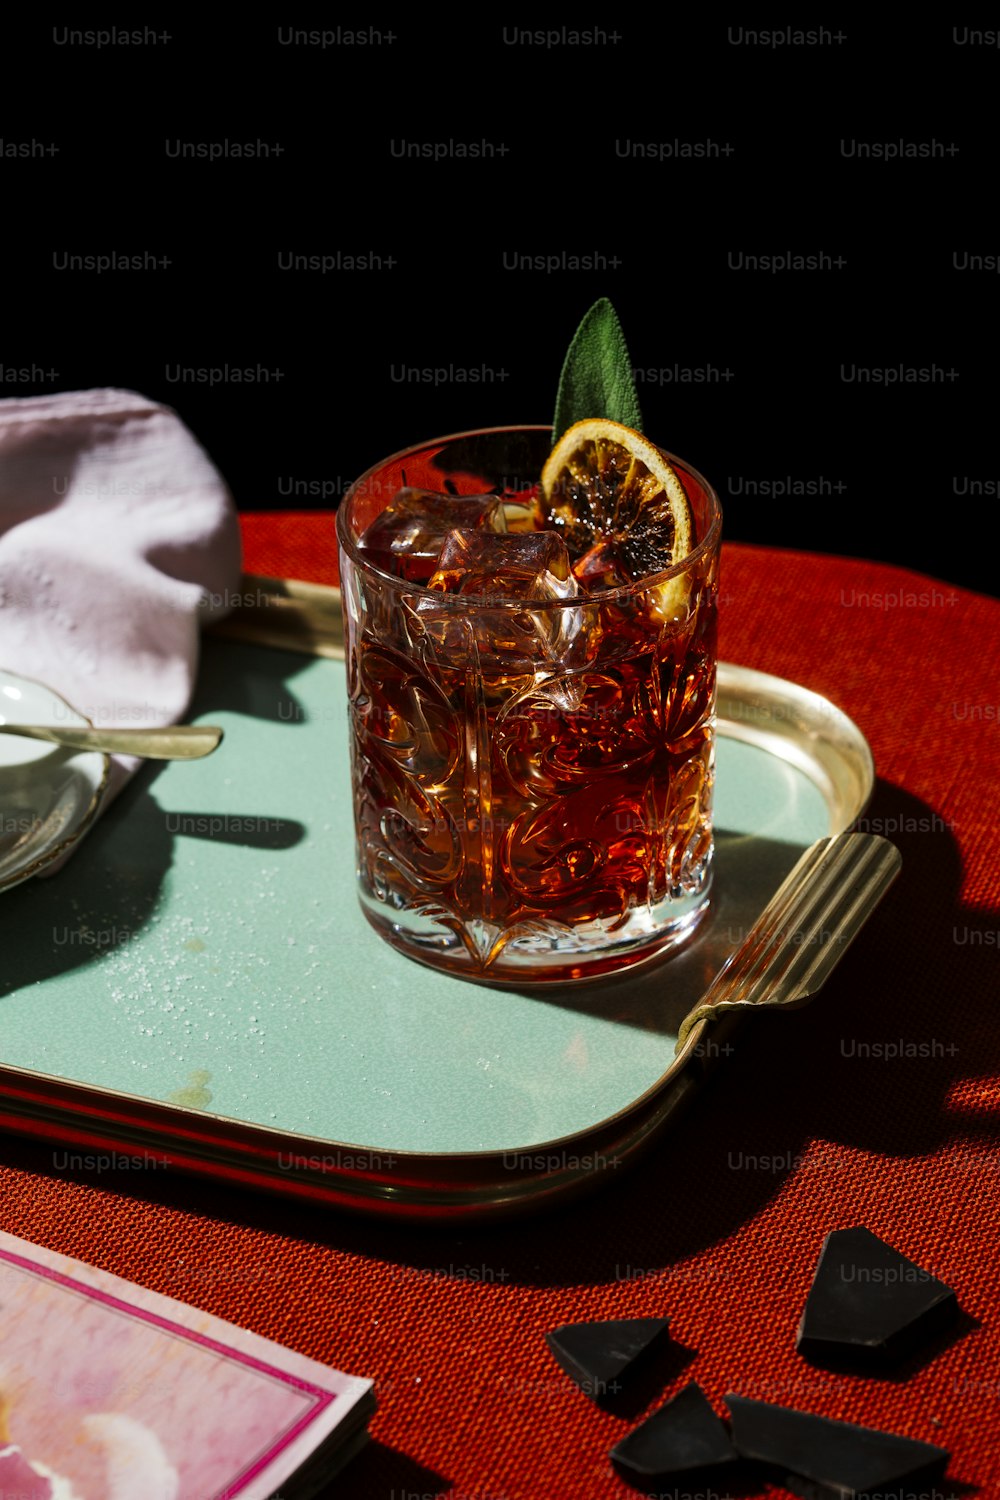 Negroni, an Iba cocktail, with 1/3 gin, 1/3 bitter, 1/3 vermut, in colorful and rich contemporary style.